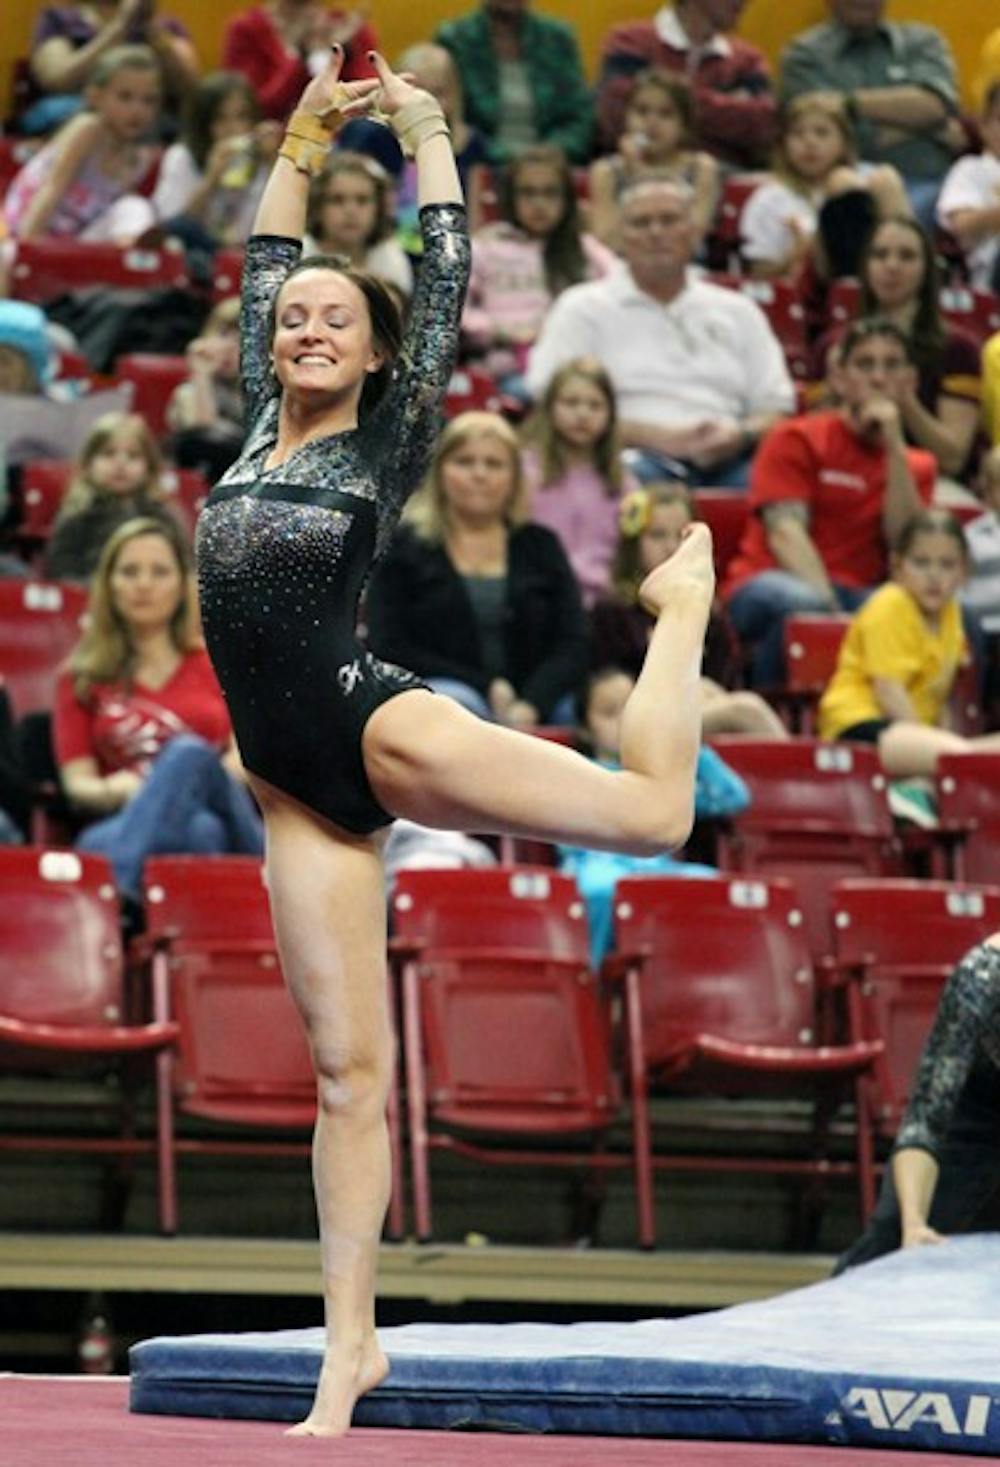 Brianna Gades performs a floor routine in a meet against Utah on Feb. 12. Gades scored a career high of 9.850 on the balance beam. (Photo by Beth Easterbrook)